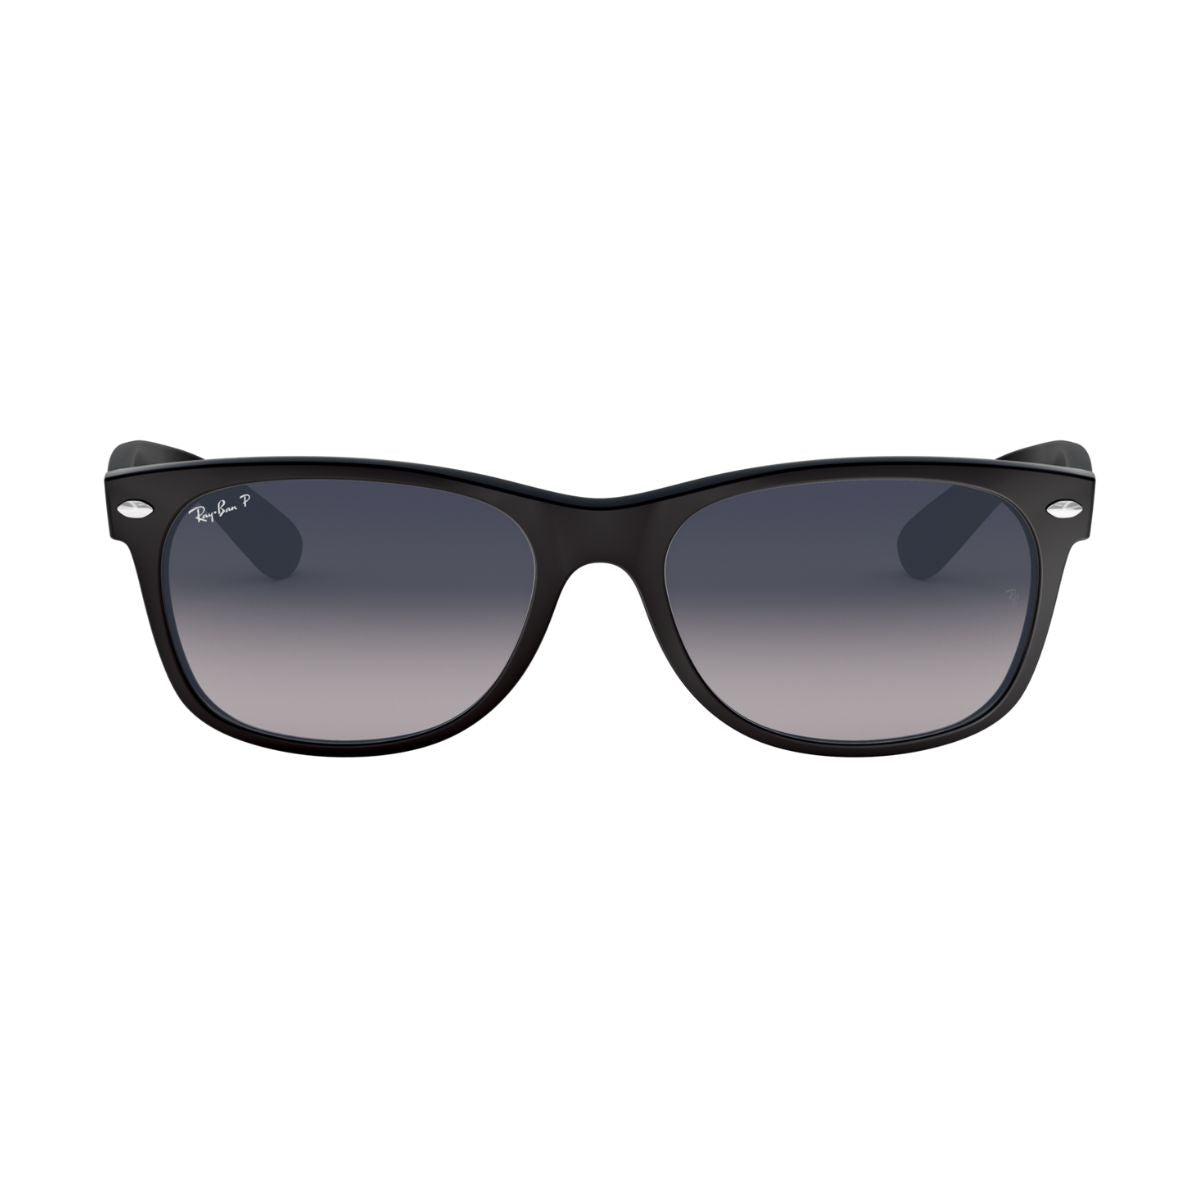 "Buy Online Ray Ban 2132 601-S/78 Polarized Sunglass For Men And Women At Optorium"